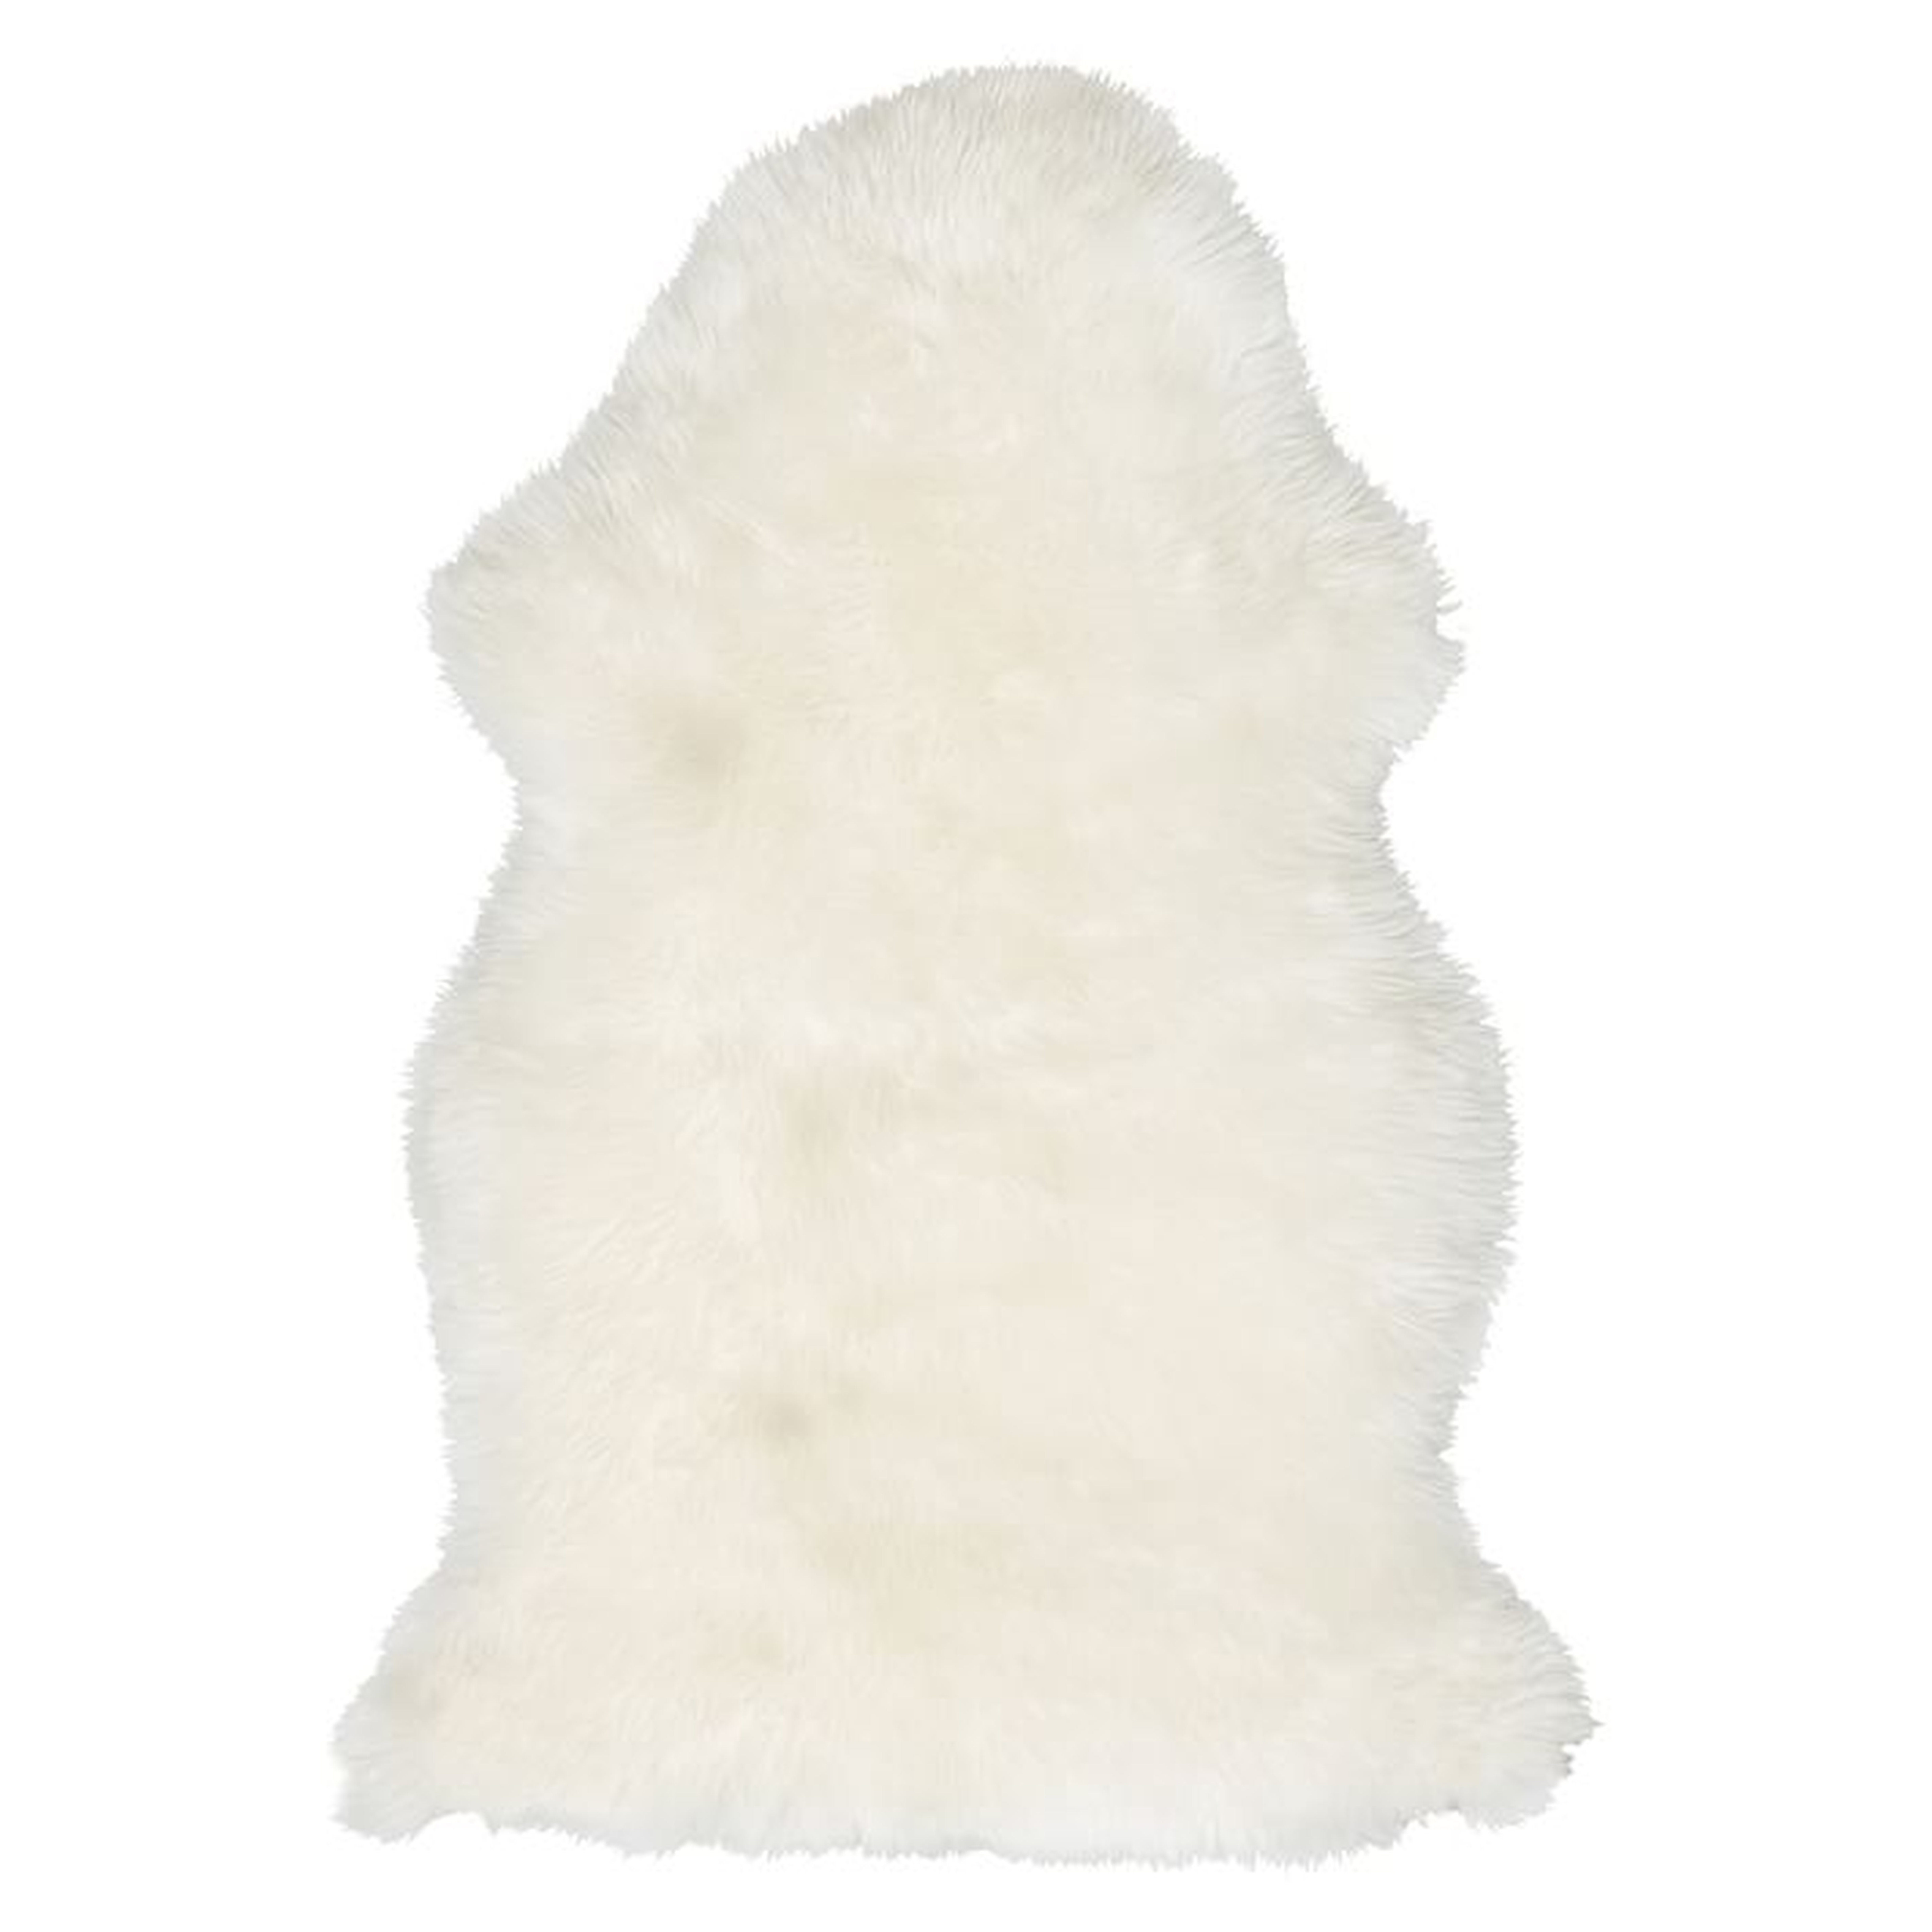 Supersoft Shearling Rug - Pottery Barn Teen